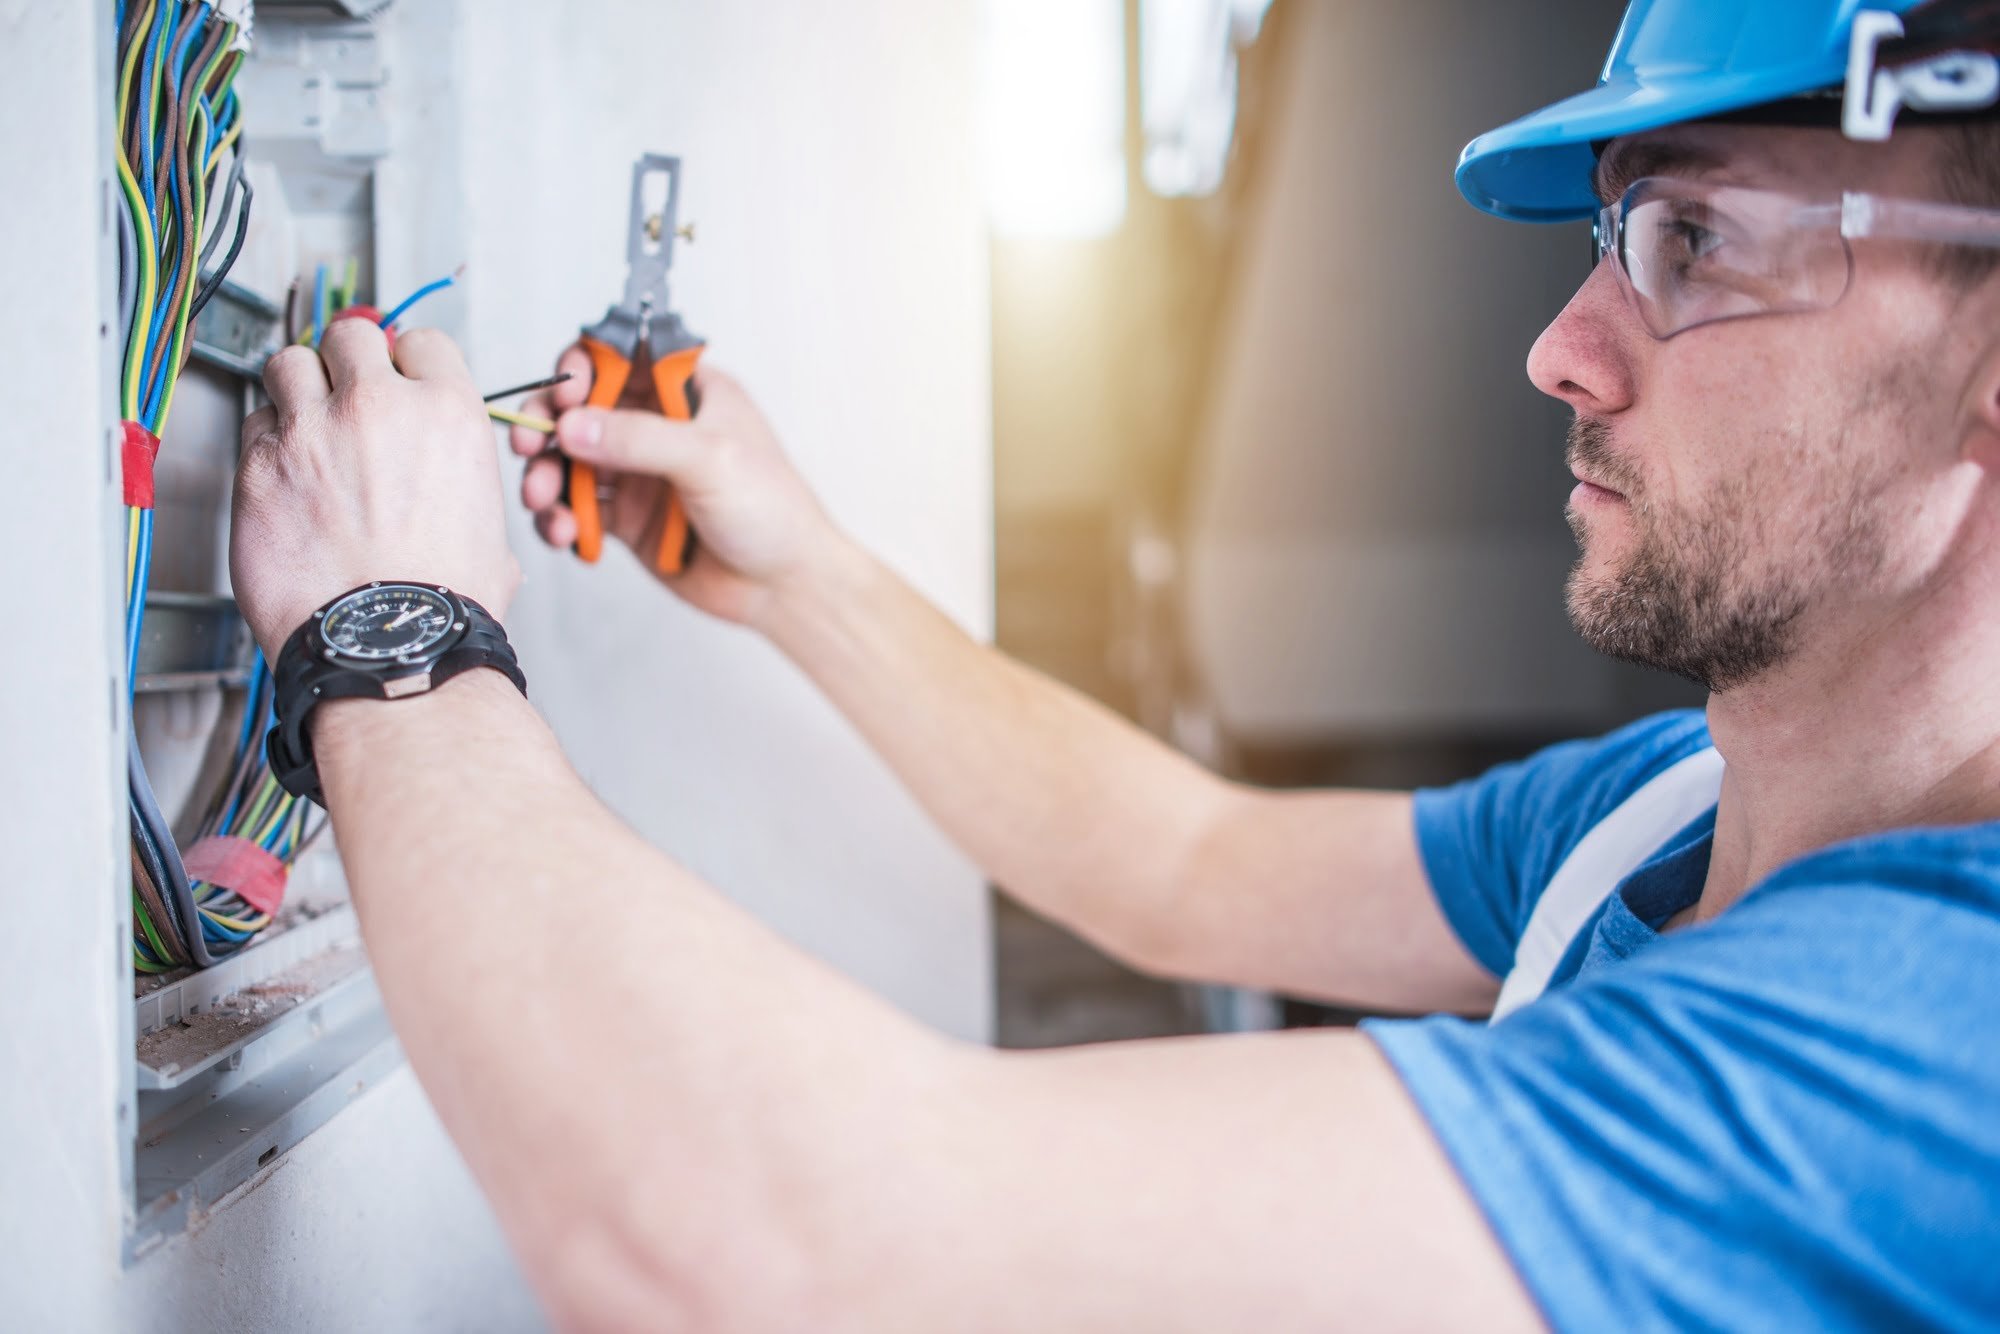 Did you know that not all electricians are created equal these days? Here's the brief guide that makes choosing the best electrician simple.